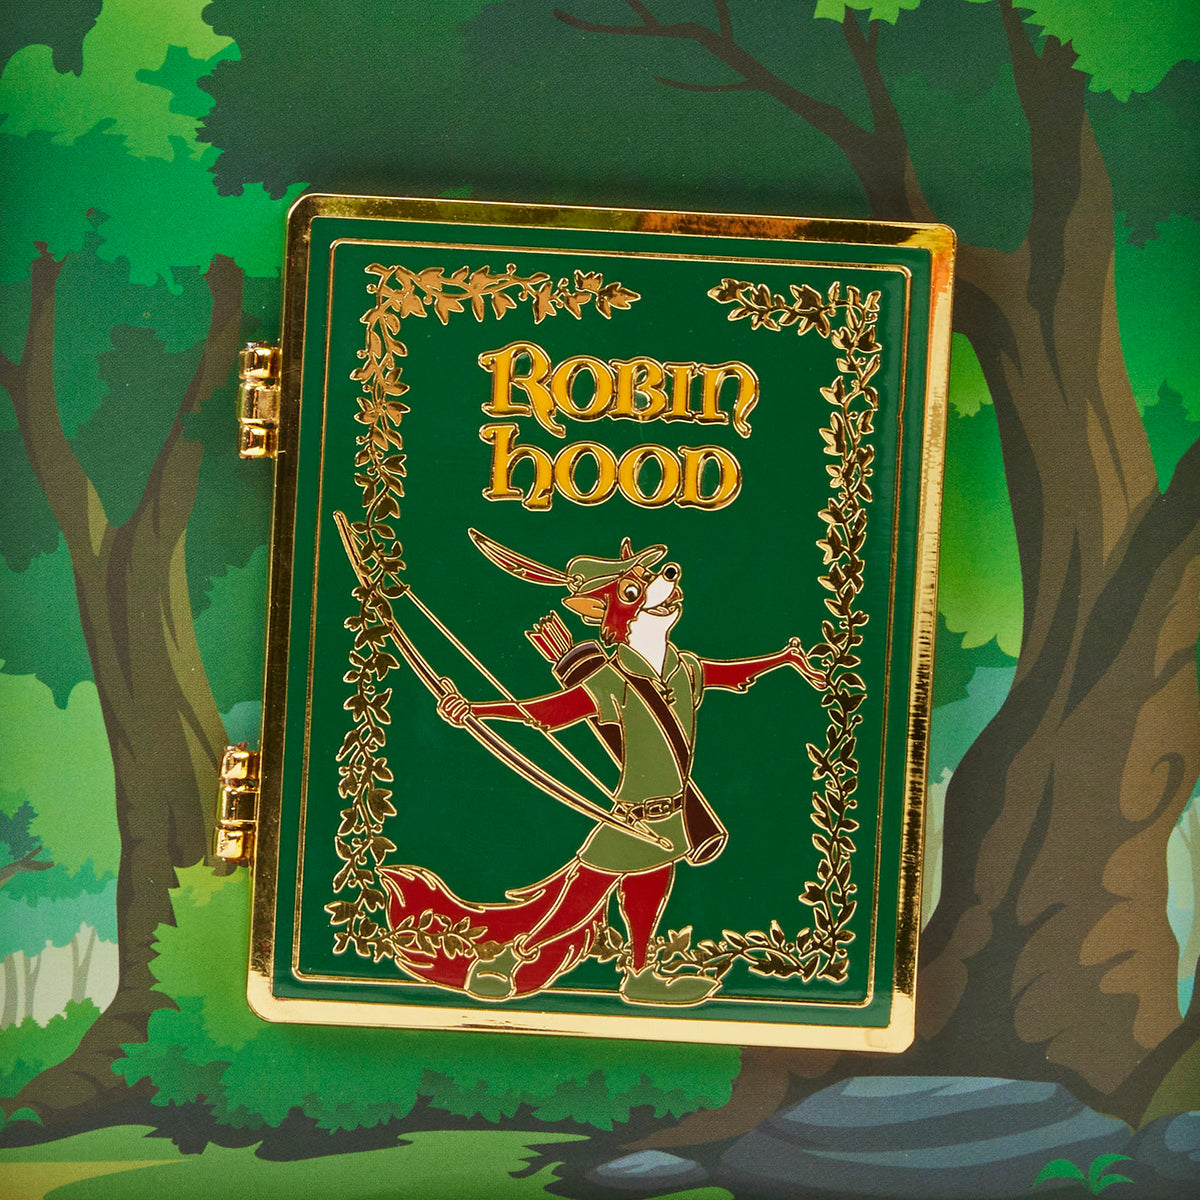 Disney Fox and The Hound Classic Book 3 Collector Box Pin